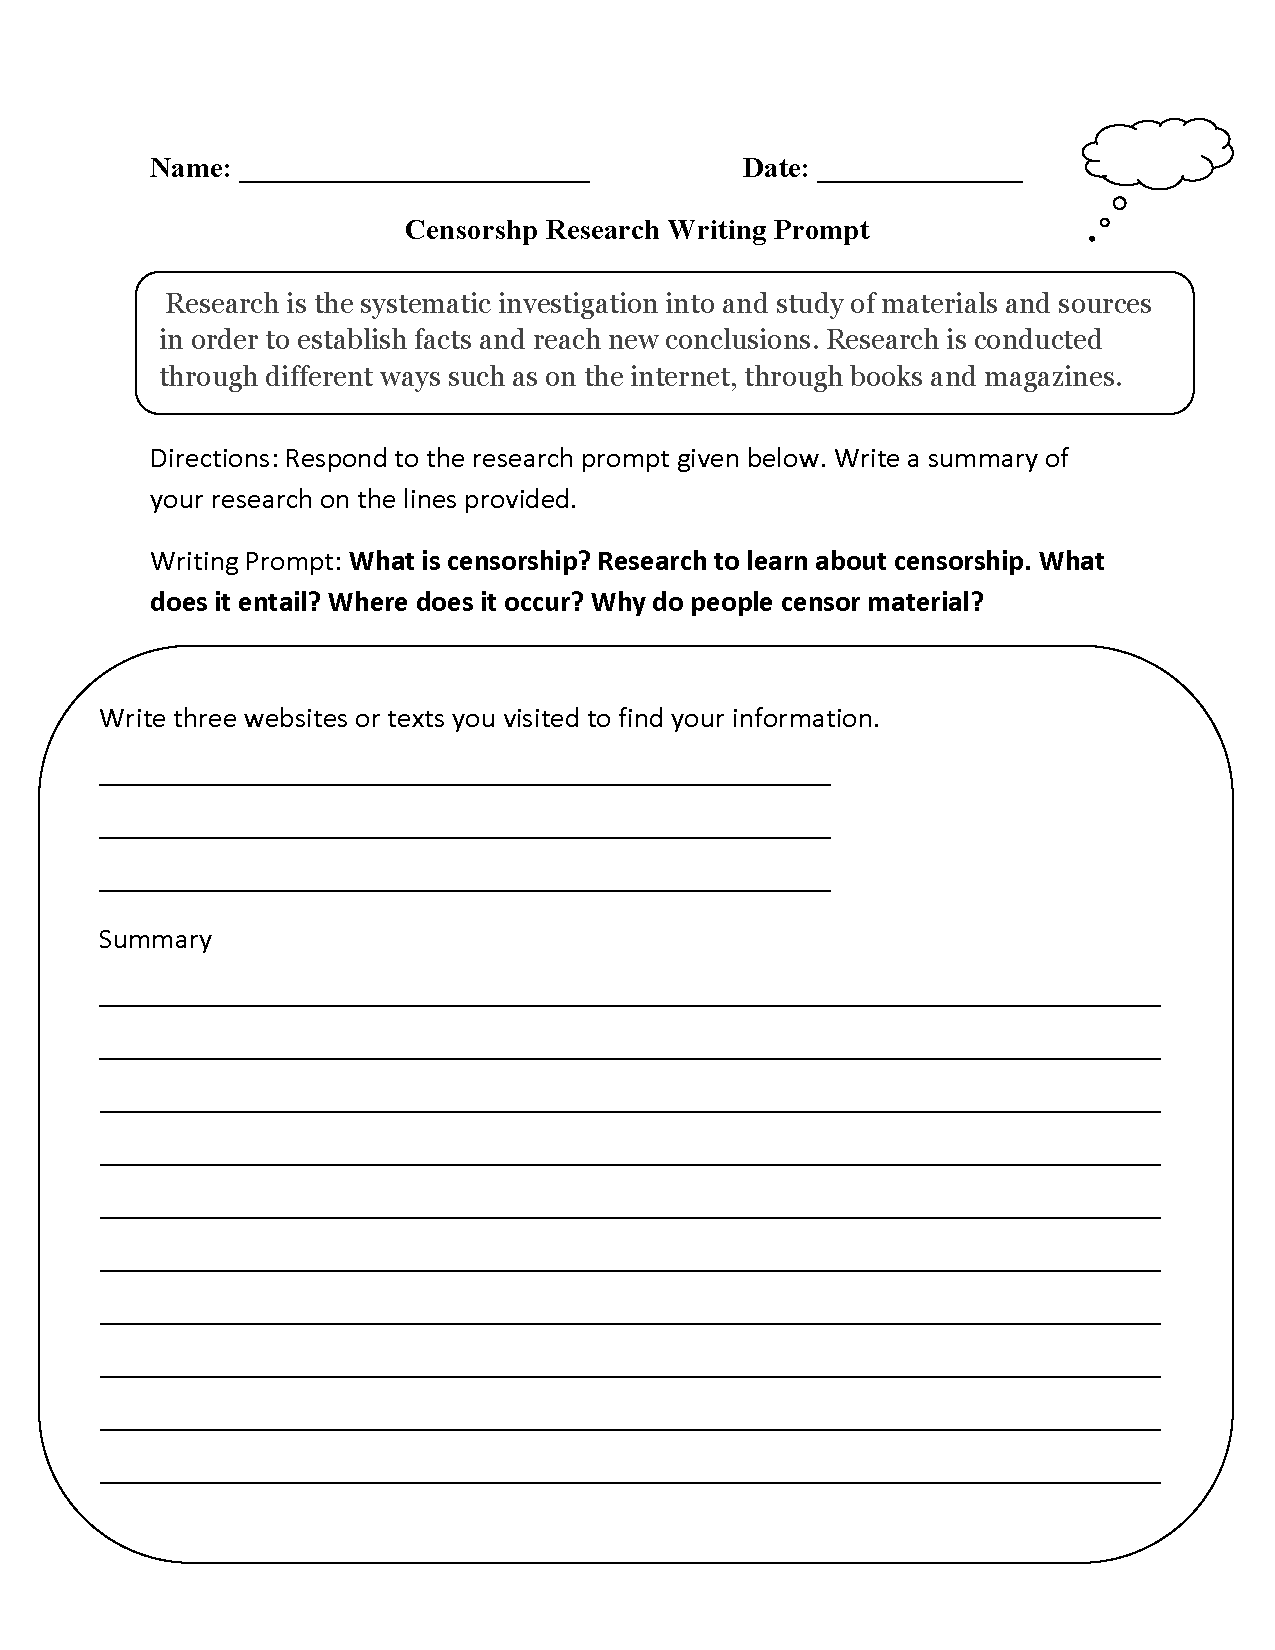 Censorship Research Writing Prompts Worksheet